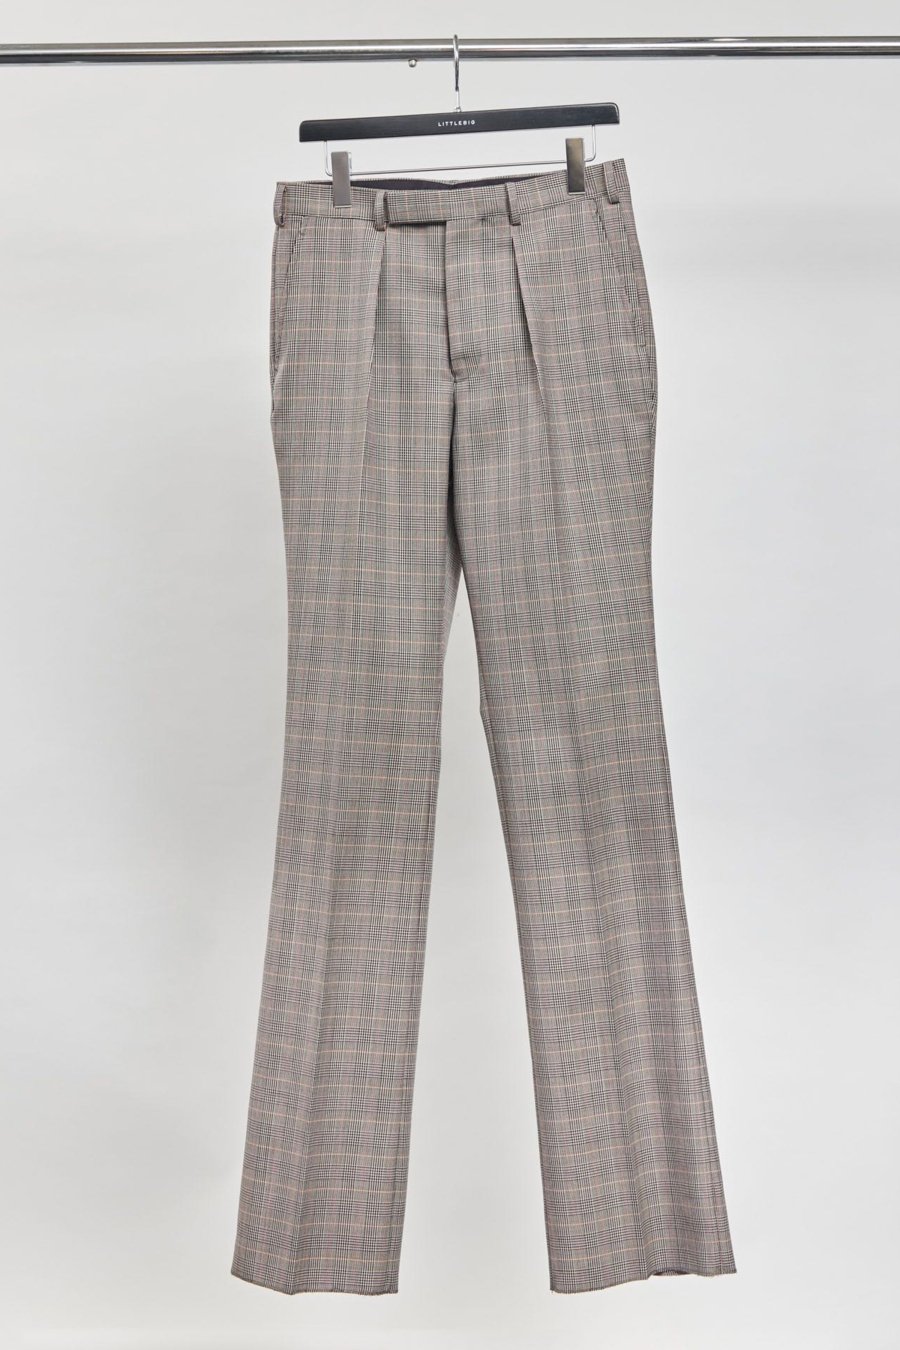 LITTLEBIG  Check Trousers<img class='new_mark_img2' src='https://img.shop-pro.jp/img/new/icons15.gif' style='border:none;display:inline;margin:0px;padding:0px;width:auto;' />